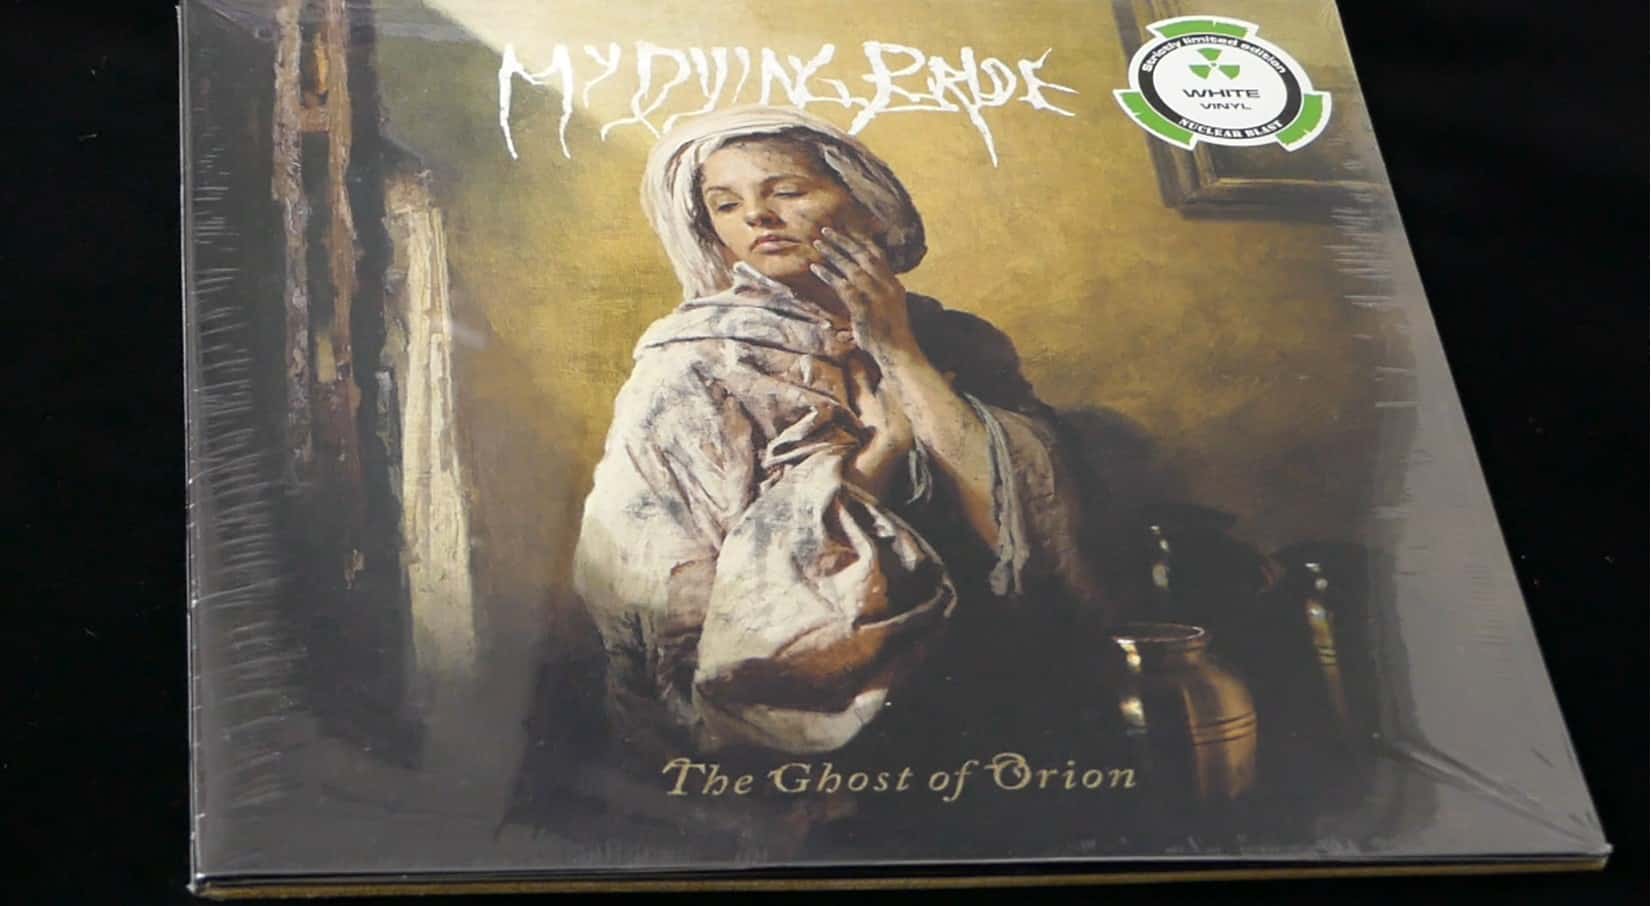 My Dying Bride - Ghost Of Orion Review